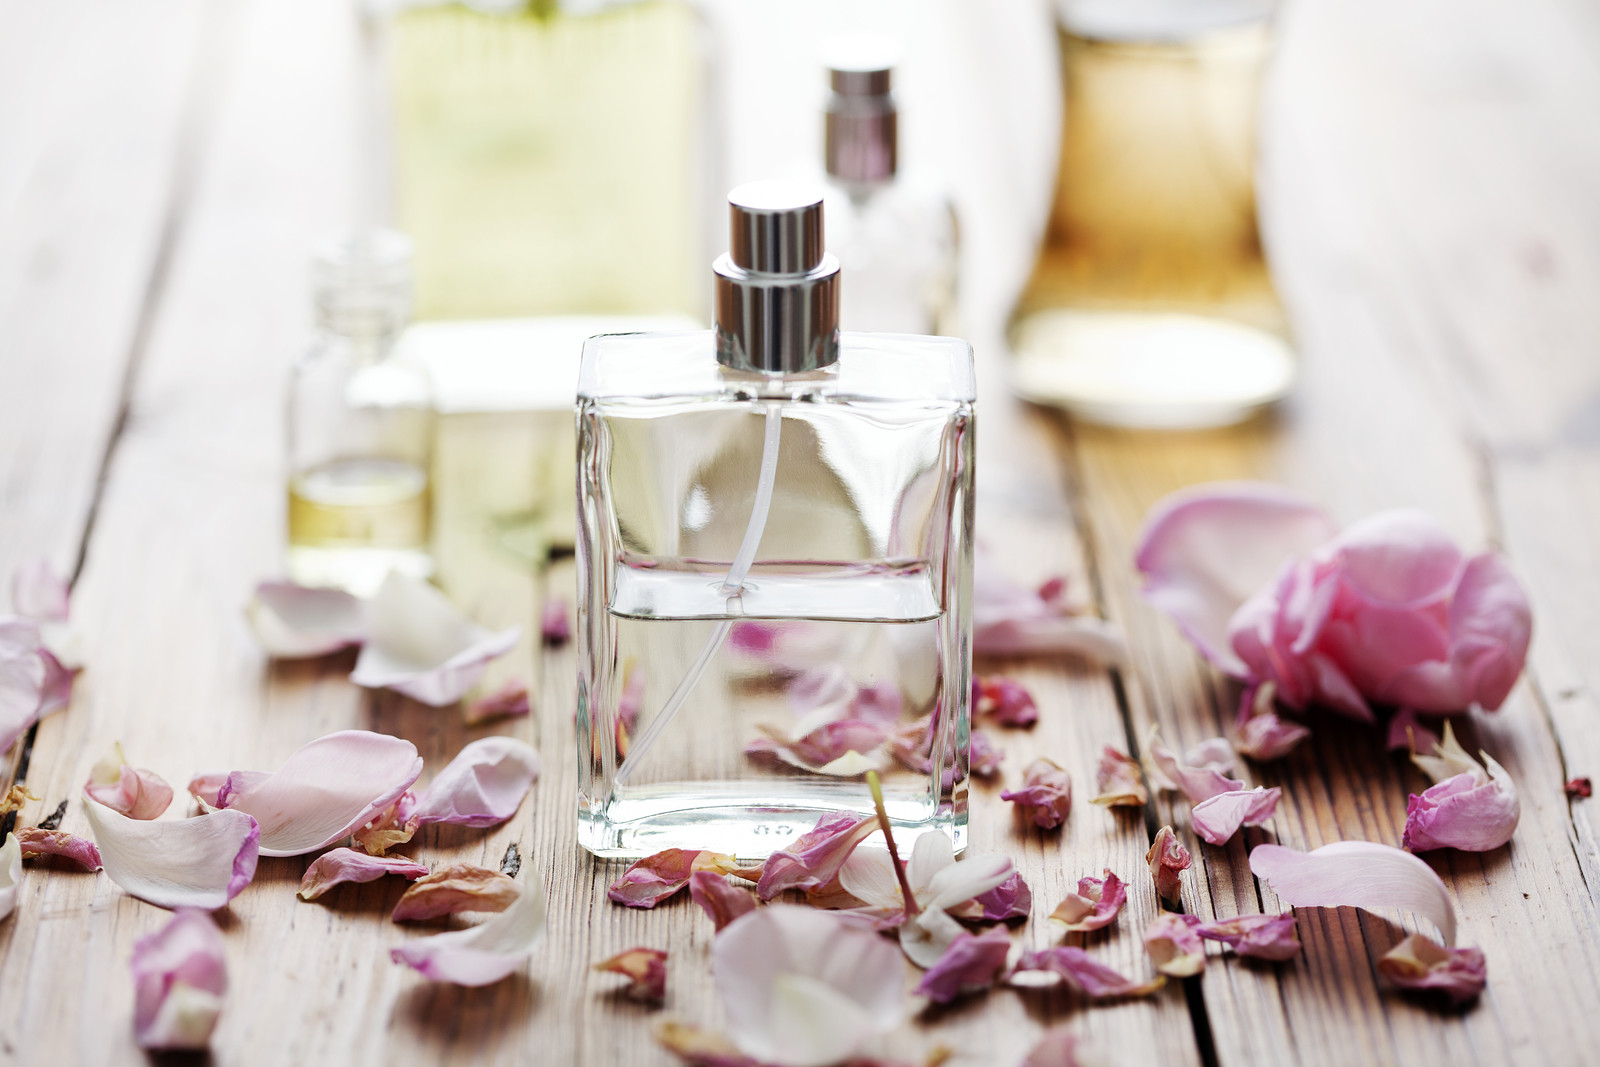 selection of natural perfume bottles surrounded by flower petals